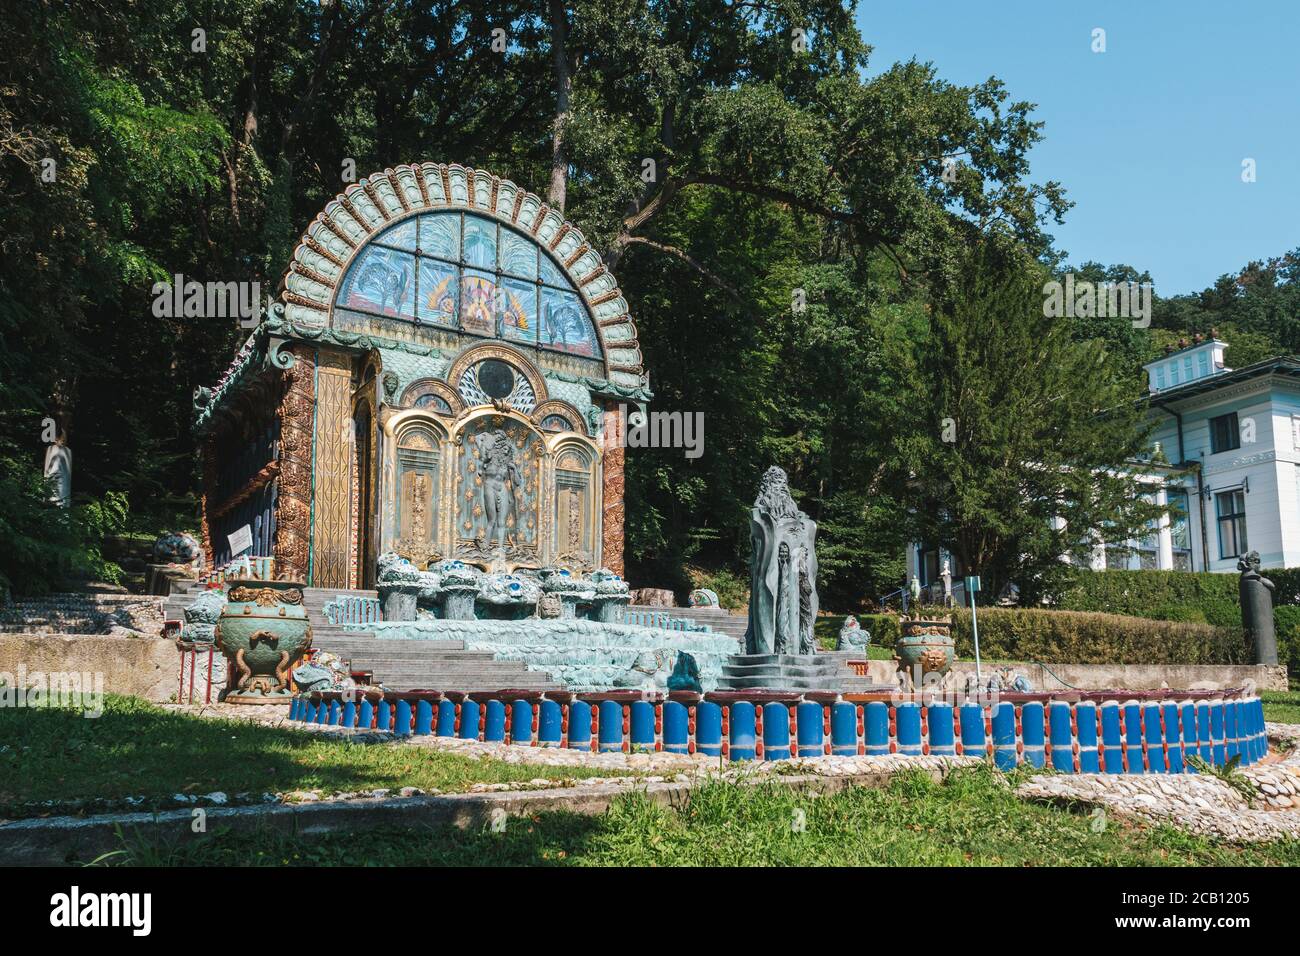 Vienna, Austria - August 8 2020: Fountain House Nymphaeum Omega in the Park of the Ernst Fuchs Museum, at the Otto Wagner Villa in the Hütteldor Subur Stock Photo